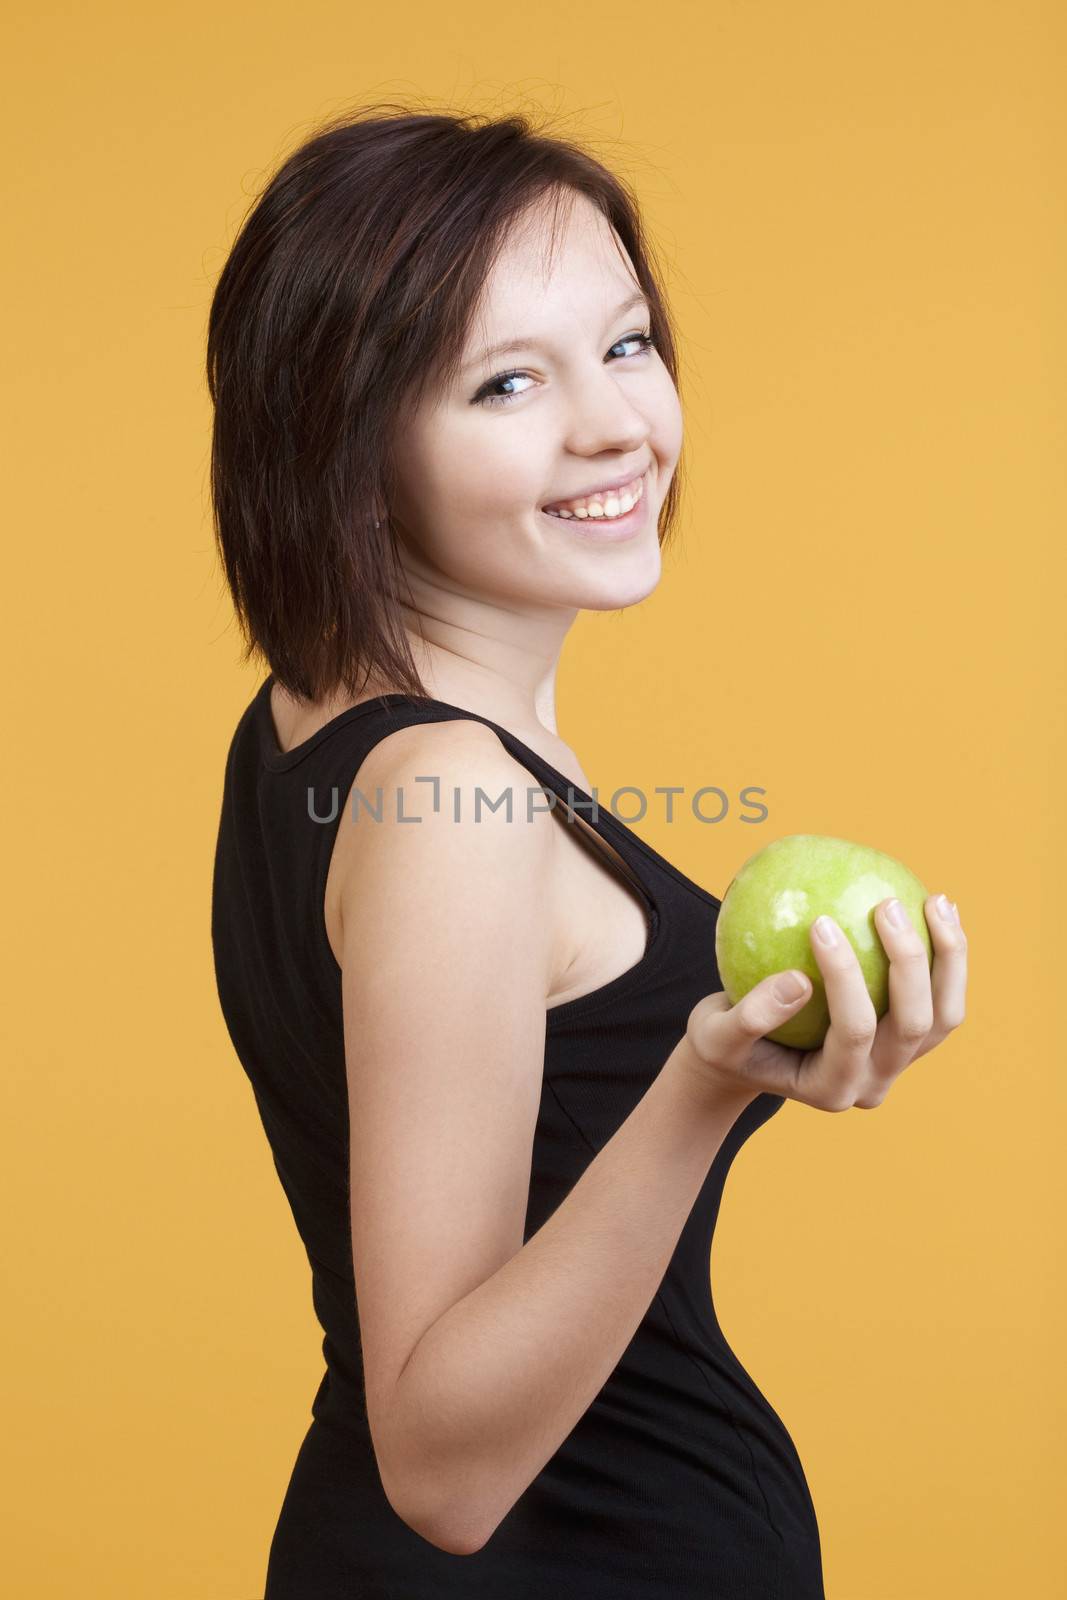 teenage girl holding a green apple smiling by courtyardpix